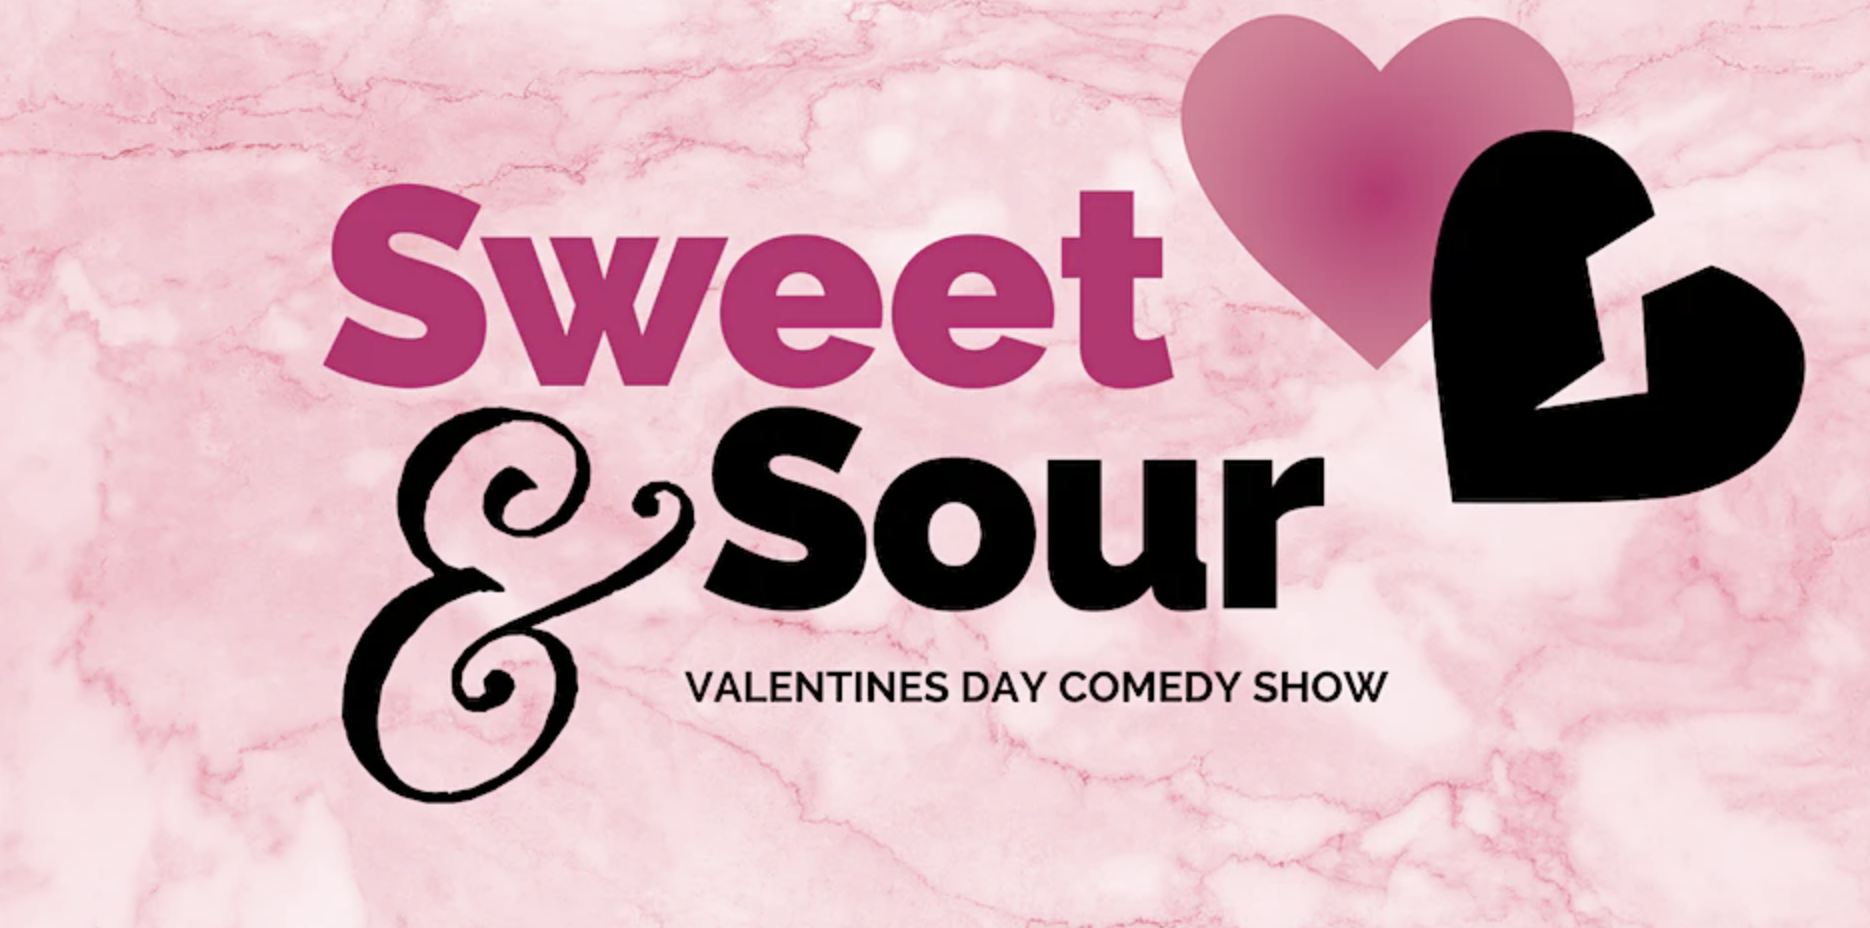 Sweet & Sour Valentine’s Day Comedy Show